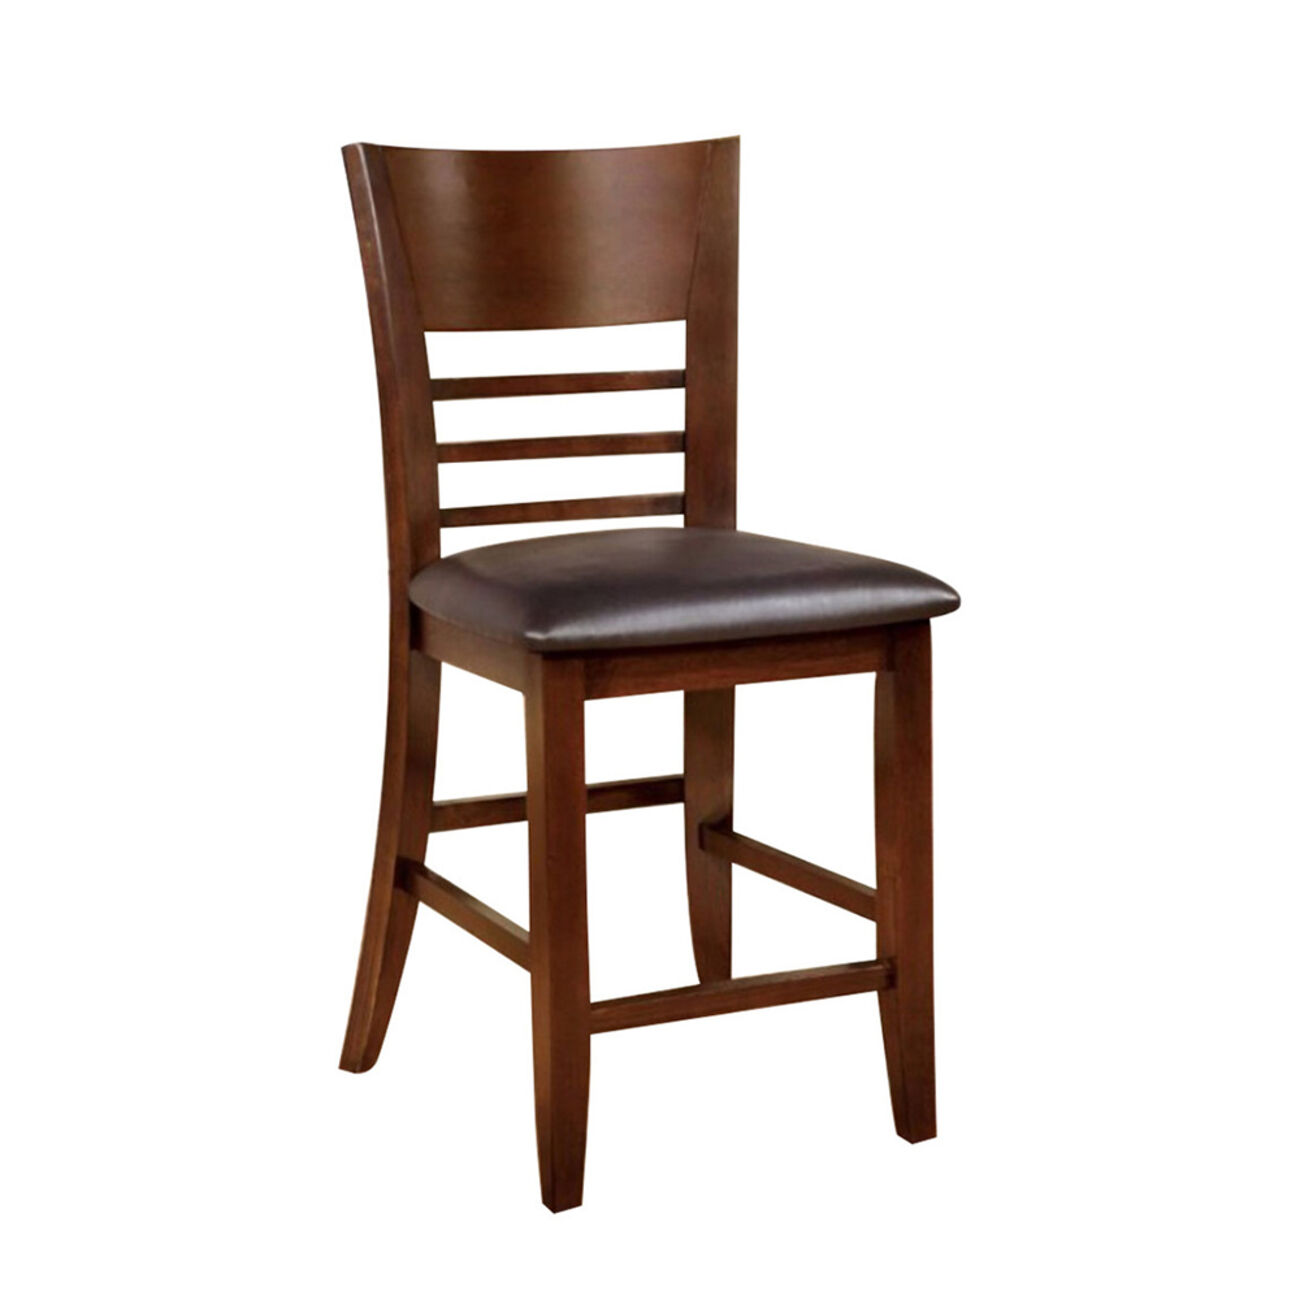 Hillsview I Transitional Counter Hight Chair, Brown Cherry, Set Of 2